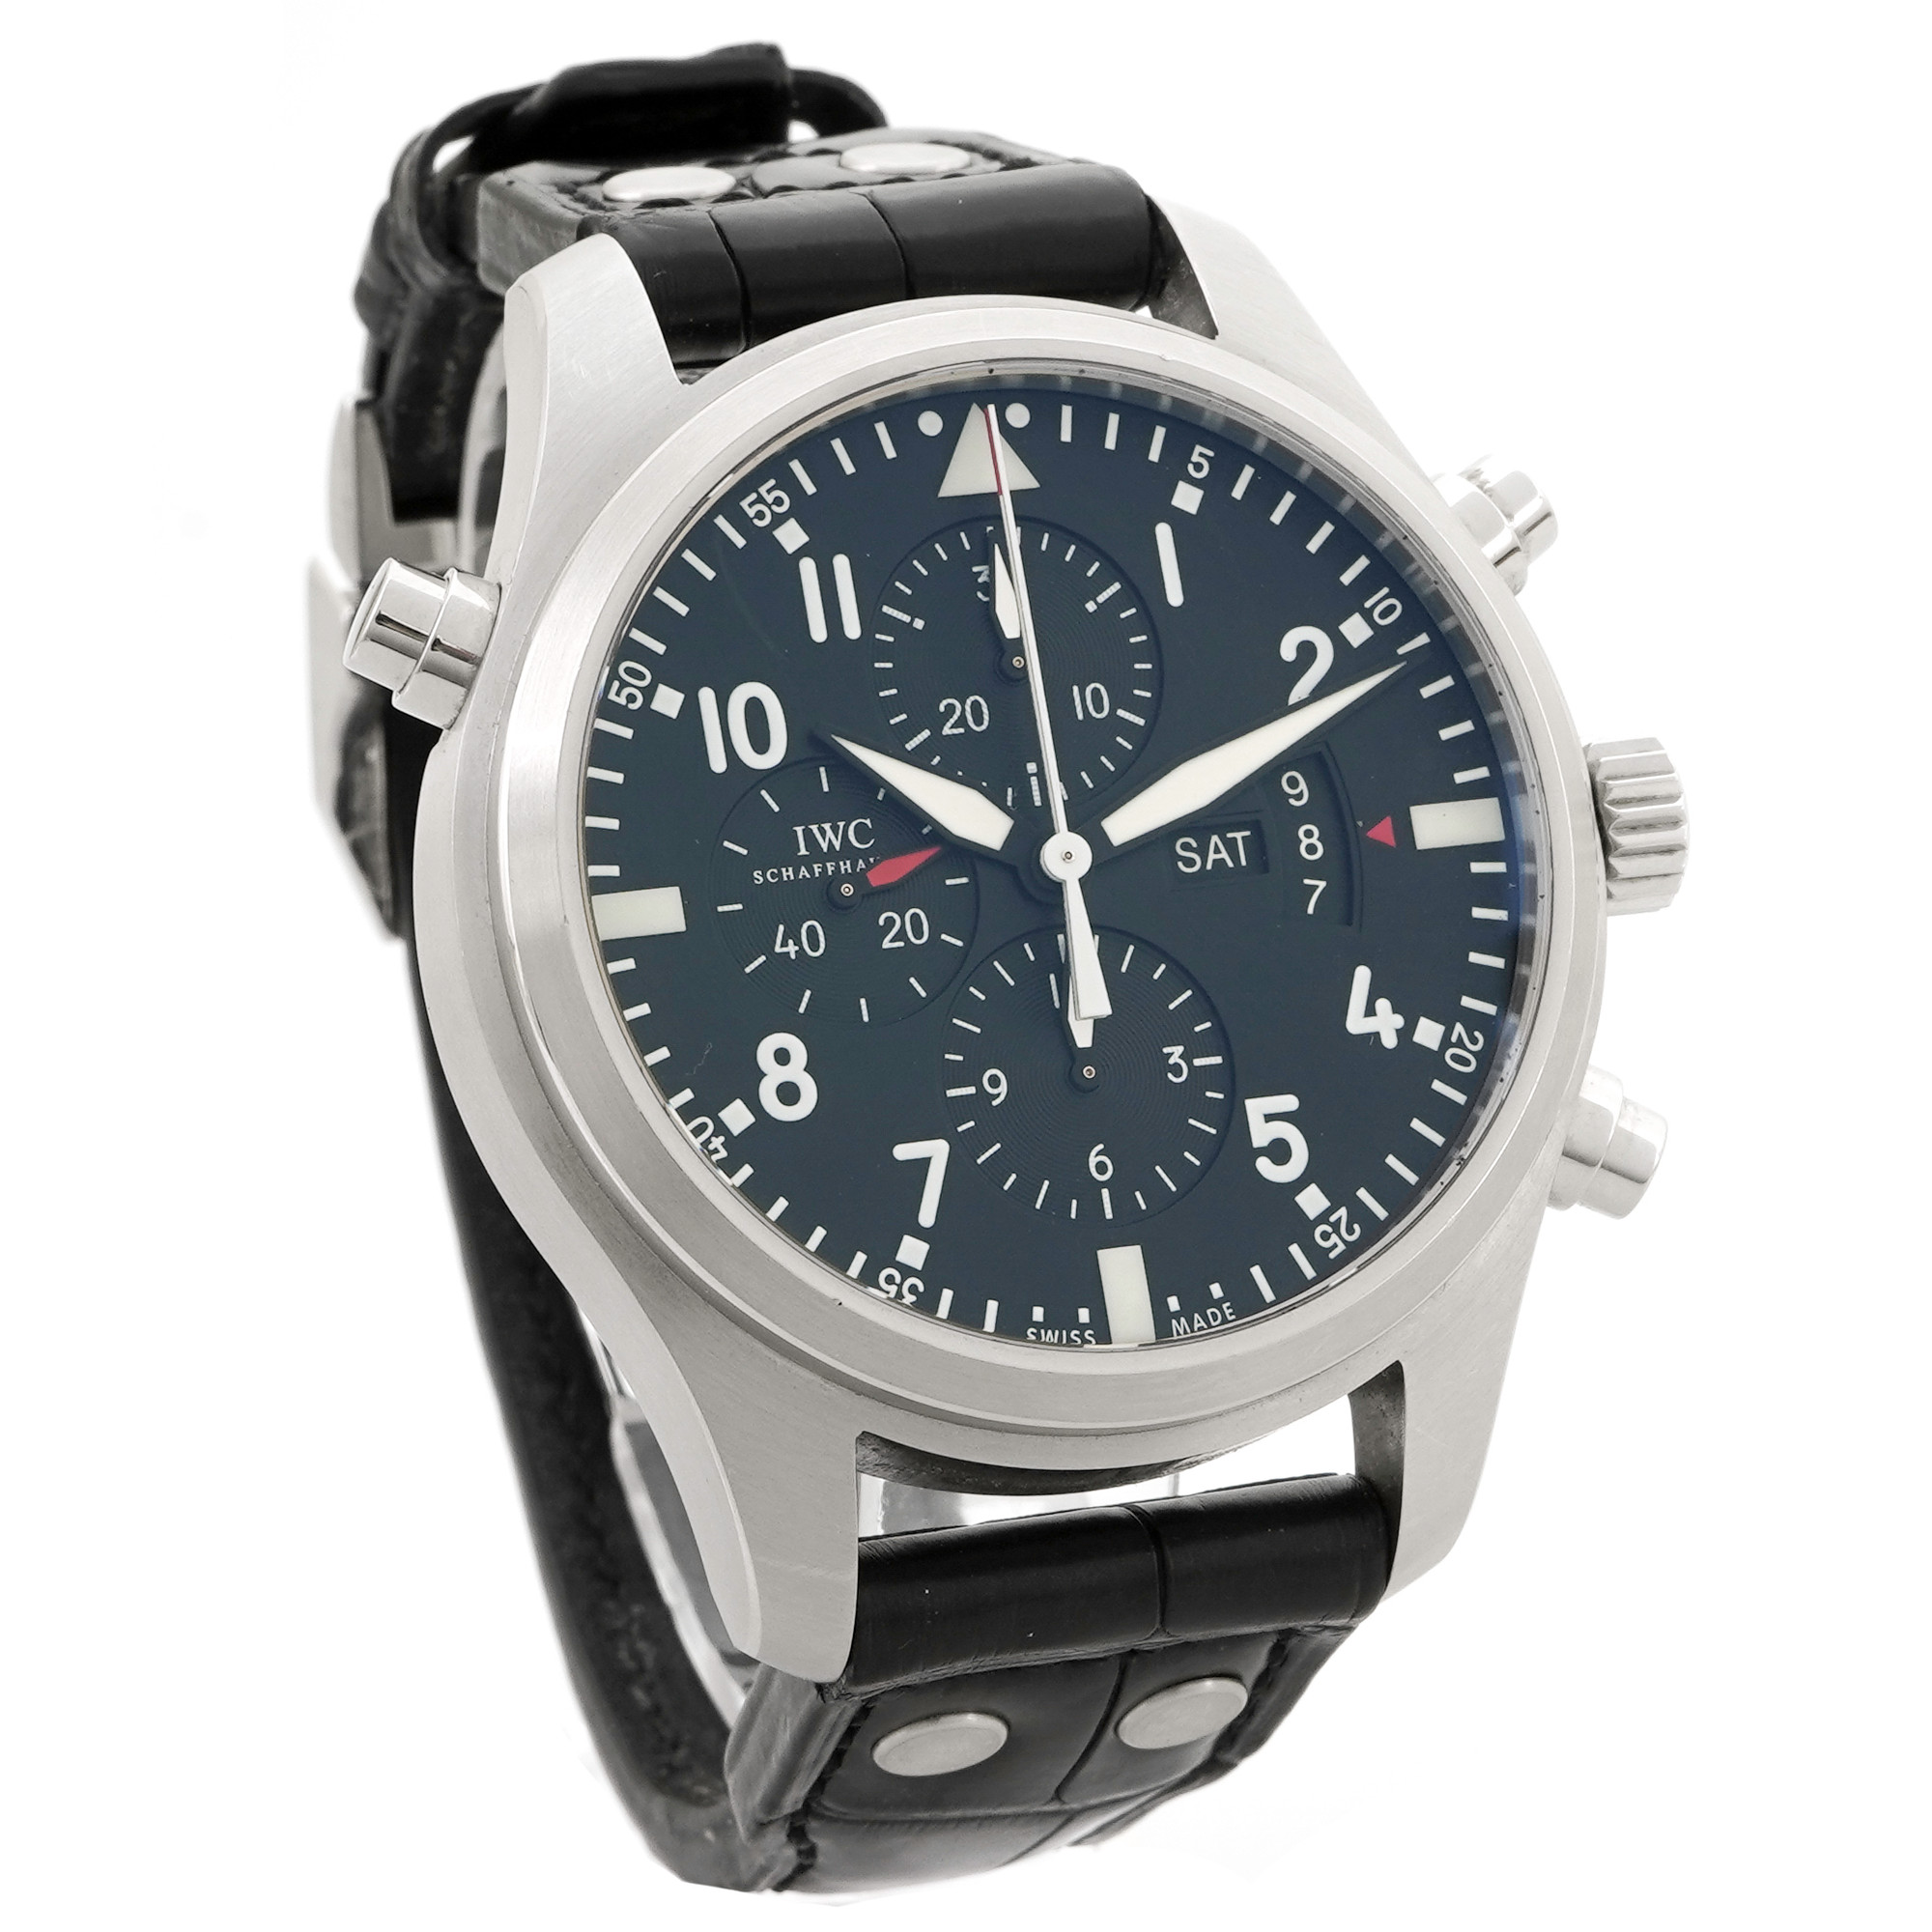 IWC Double Chronograph IW3778001 - Inventory 4725